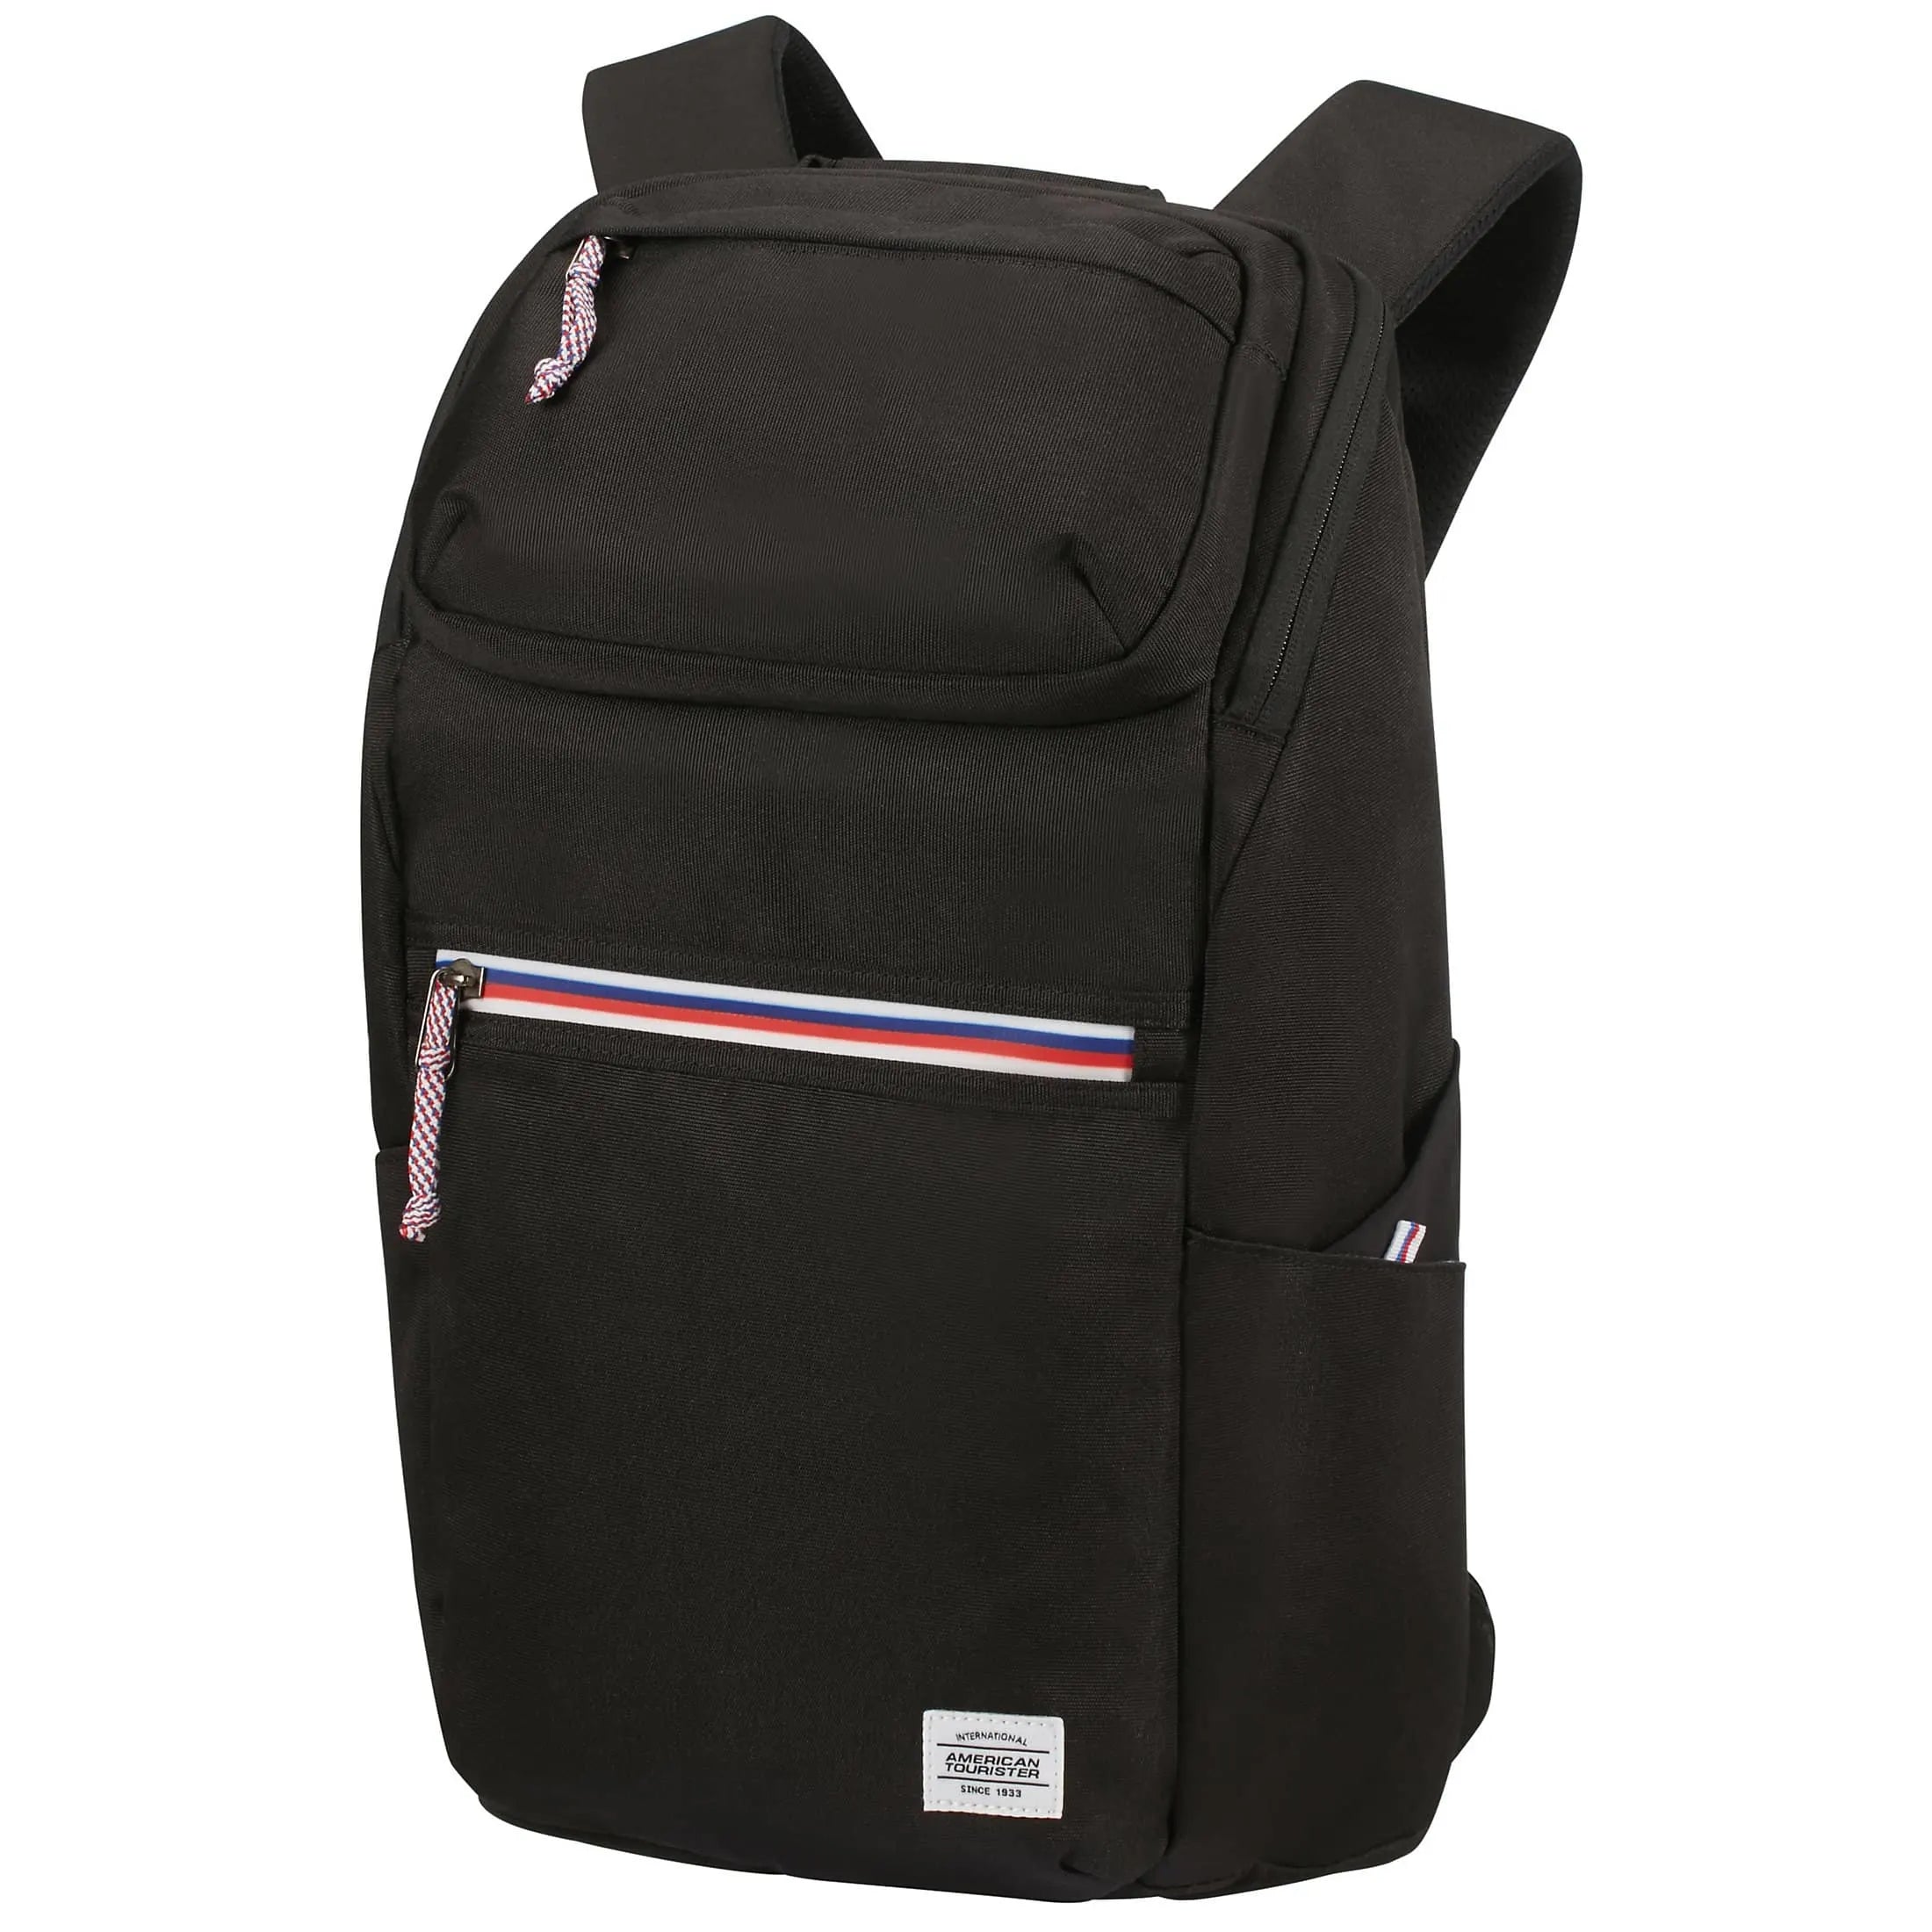 American Tourister Upbeat Backpack 51 cm - black